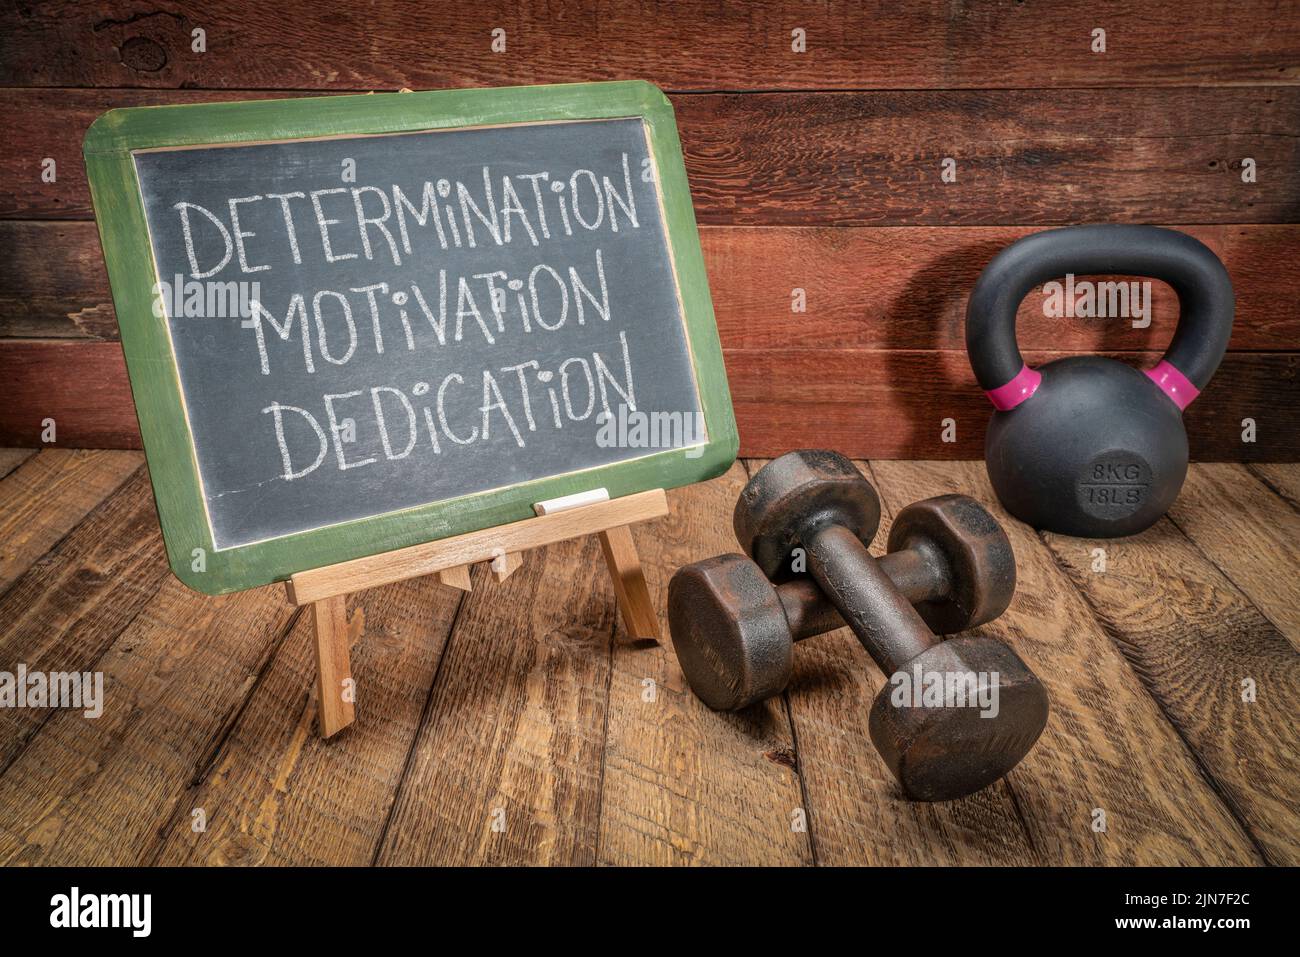 determination, motivation and dedication - inspirational text in white chalk on a slate blackboard with dumbbells and kettlebell, fitness concept Stock Photo